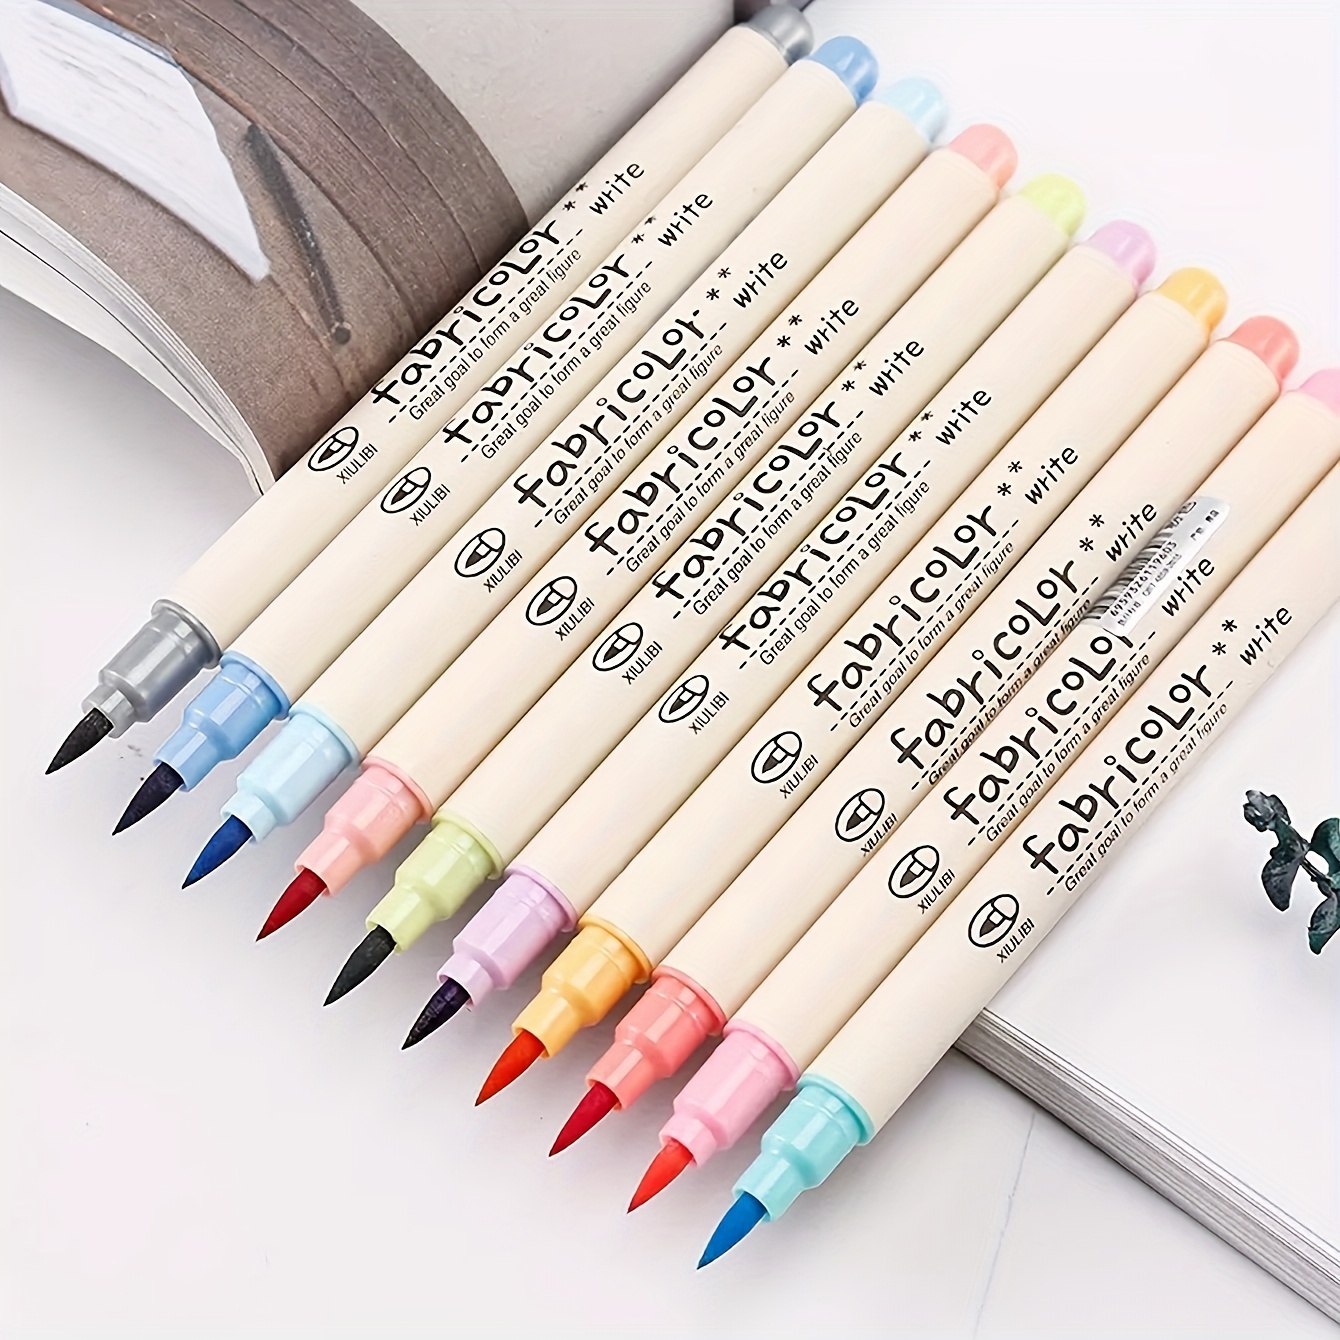 

10-piece Soft Tip Brush Pen Set In 10 Vibrant Colors - Ideal For Drawing, Calligraphy & Art Projects - Professional Watercolor Pens With Snap Cap Closure